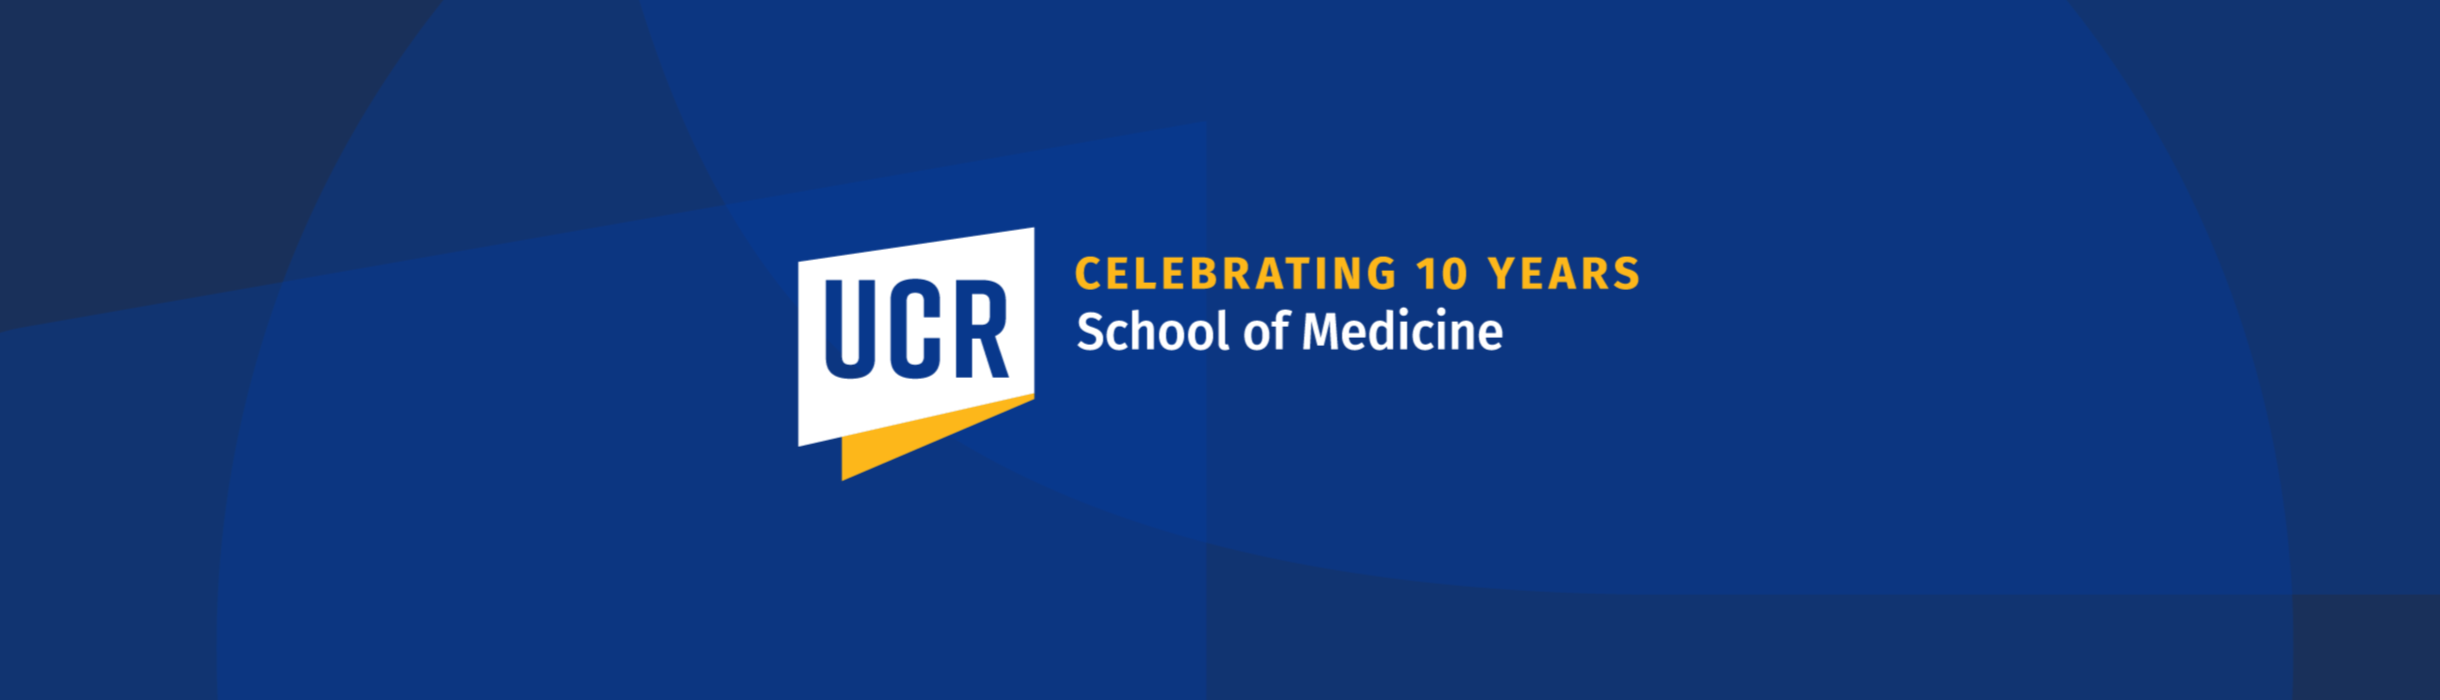 Celebrating 10 years of the UCR School of Medicine